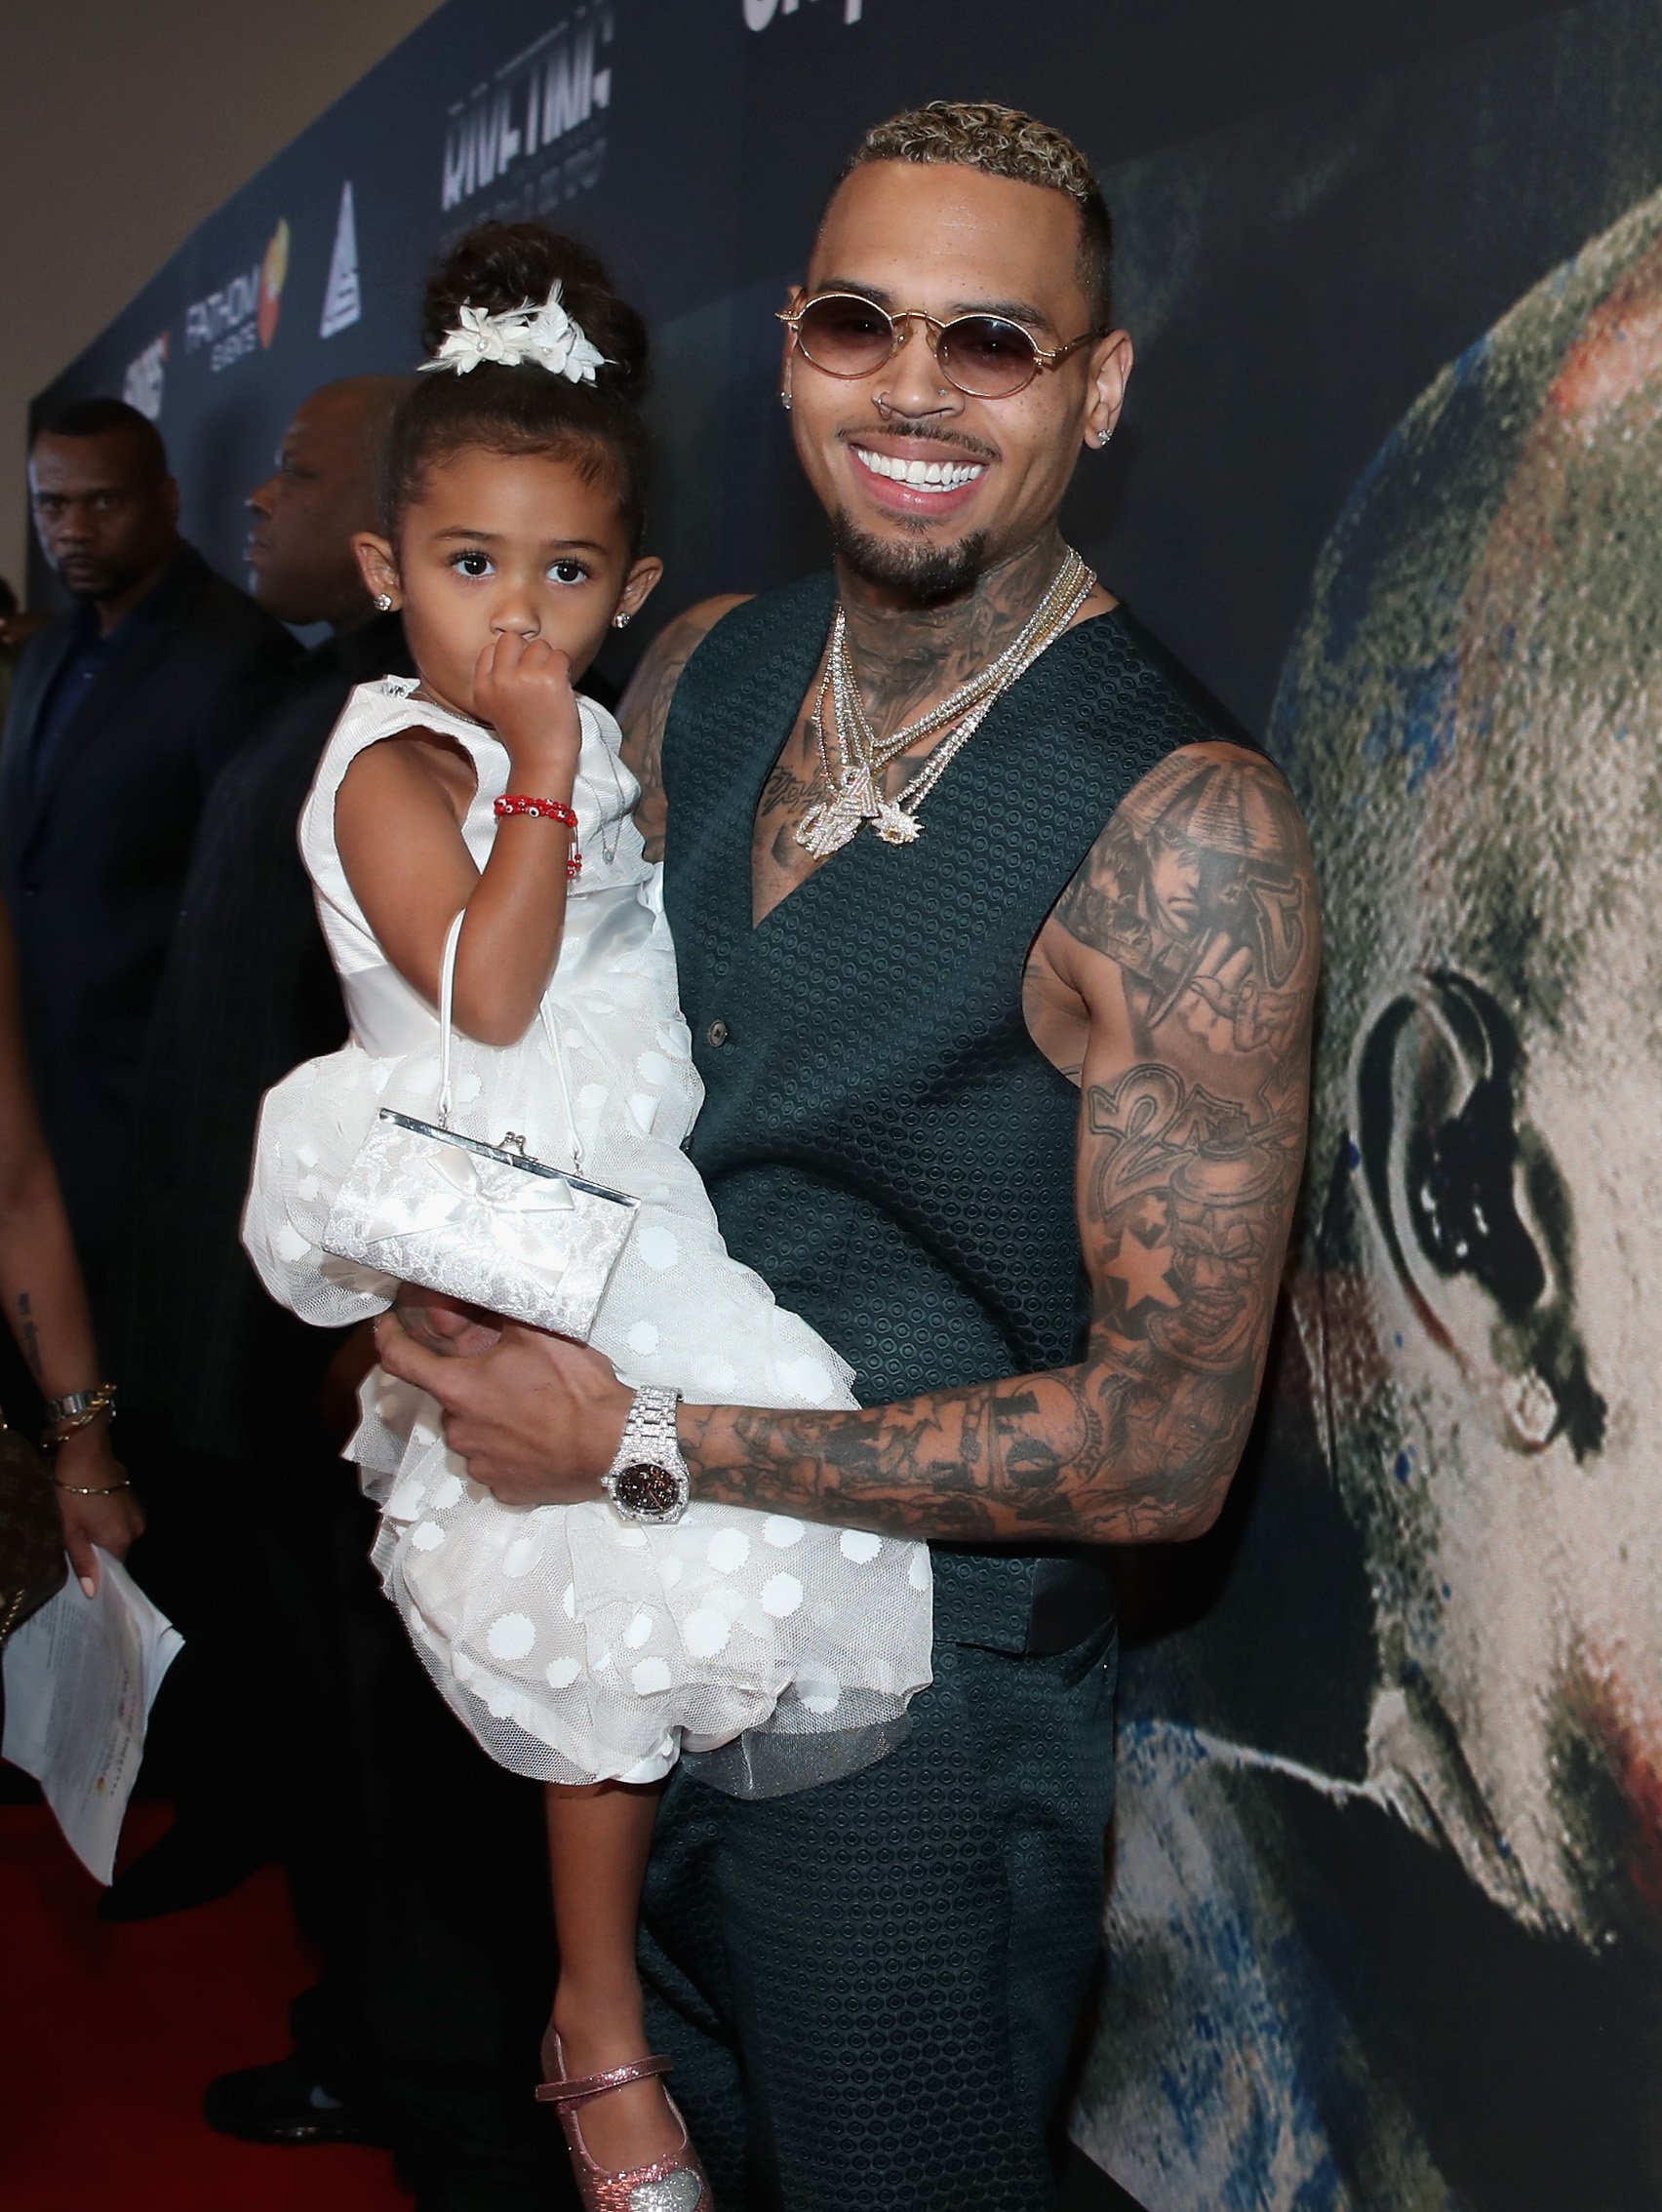 Chris Brown and daughter, Royalty at the premiere of "Chris Brown: Welcome to My Life" in June 2017. | Photo: Getty Images